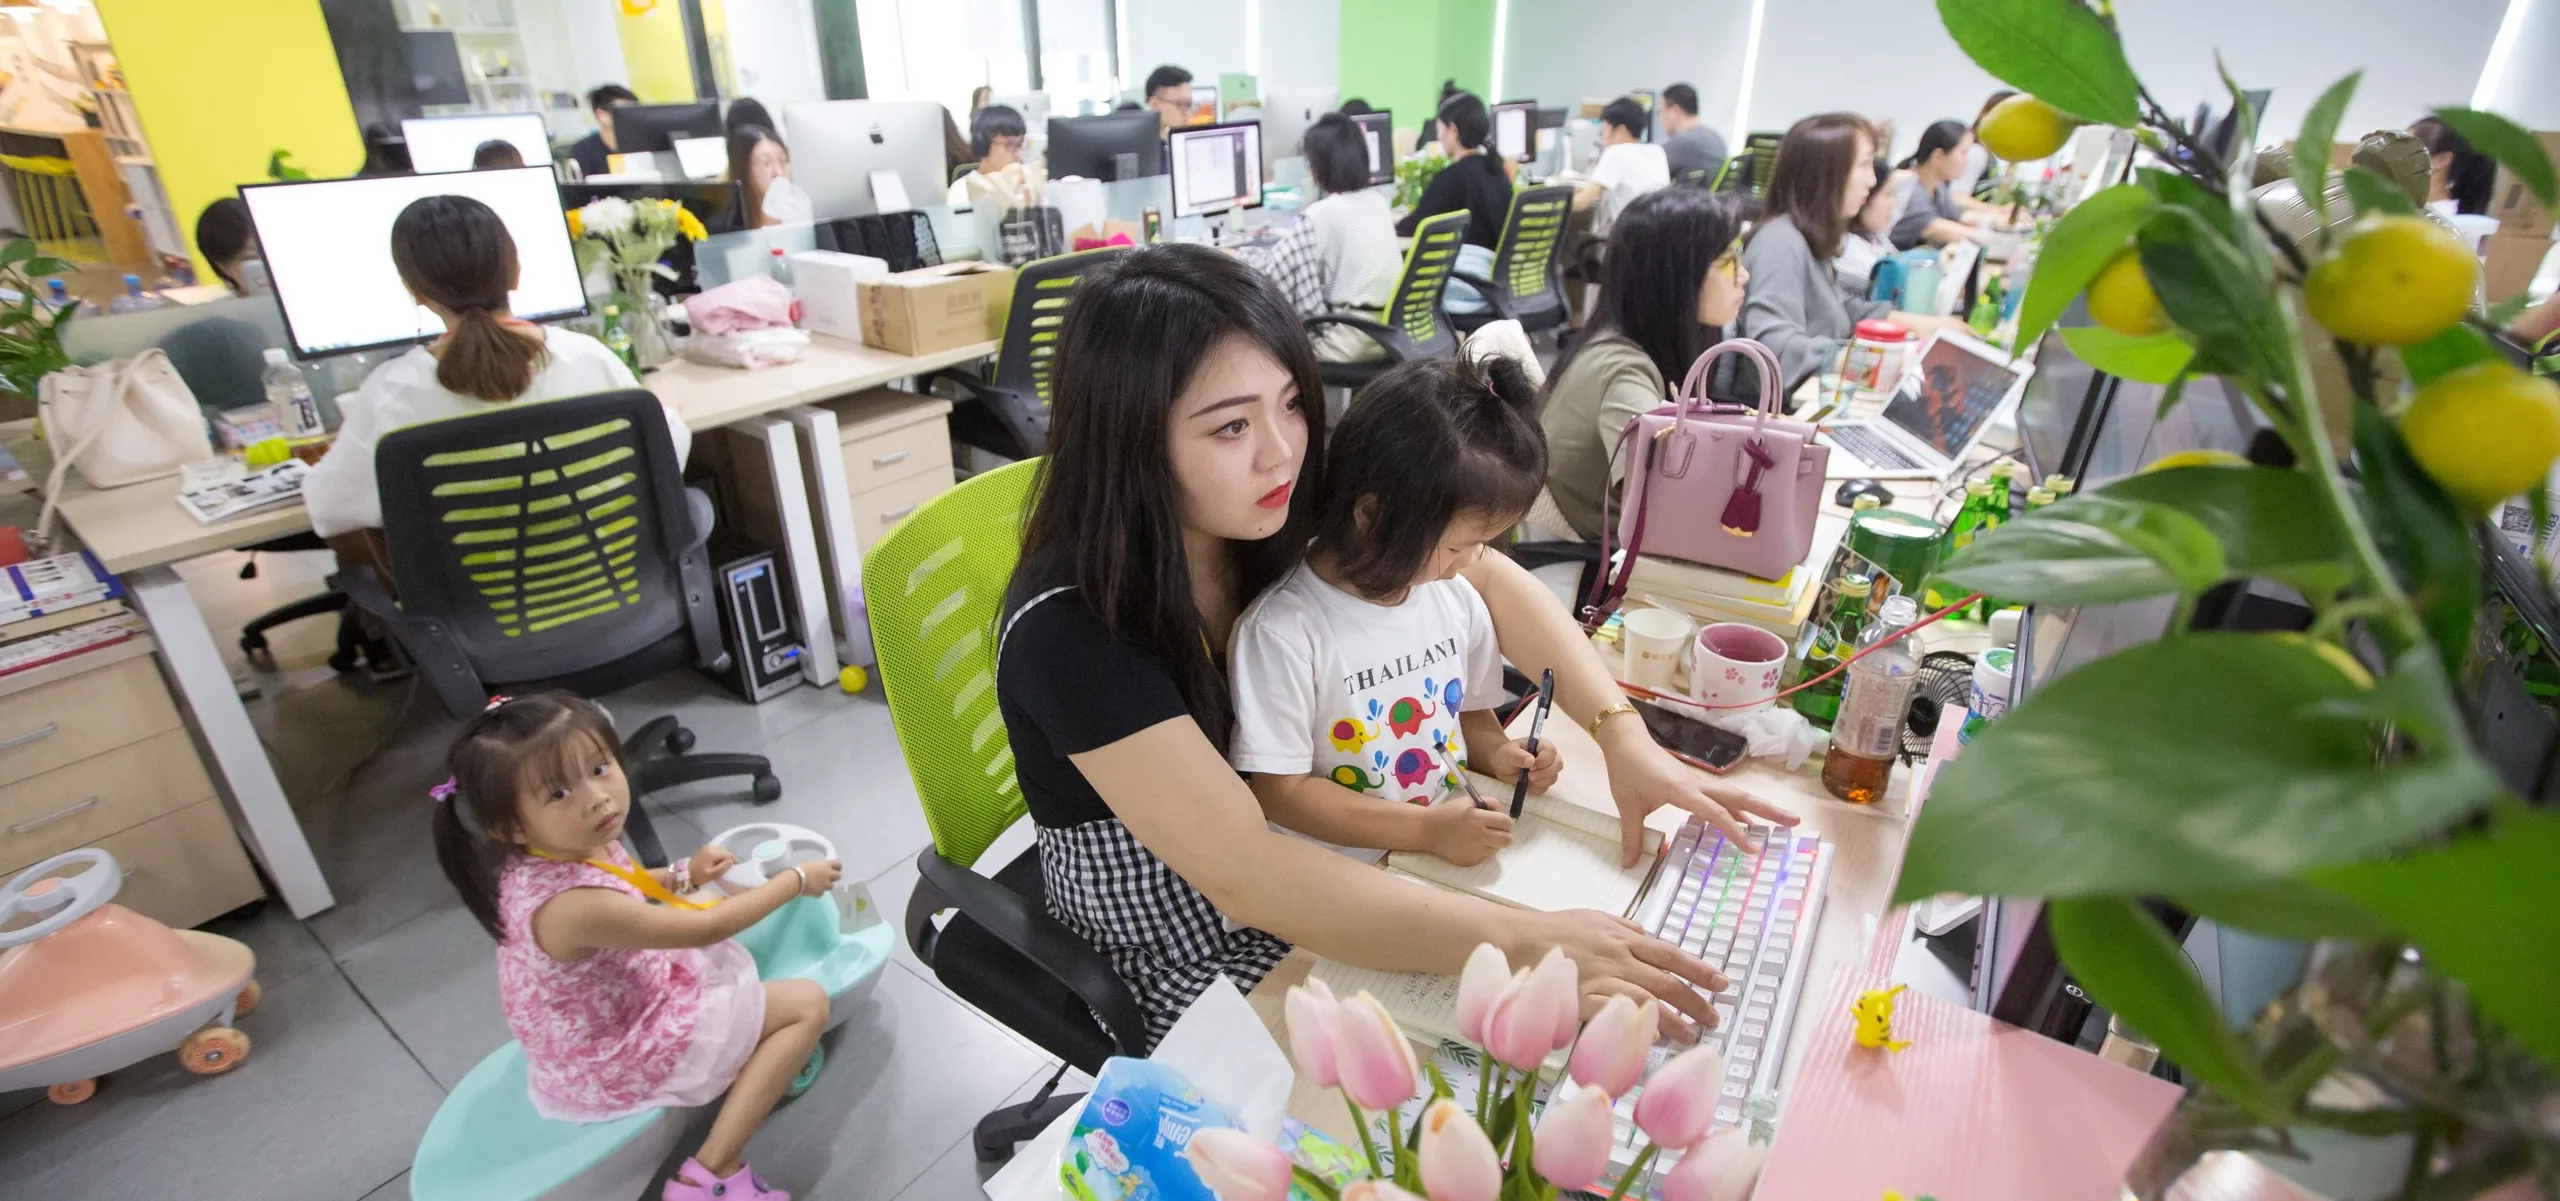 Children to go work with parents at a company in Hangzhou